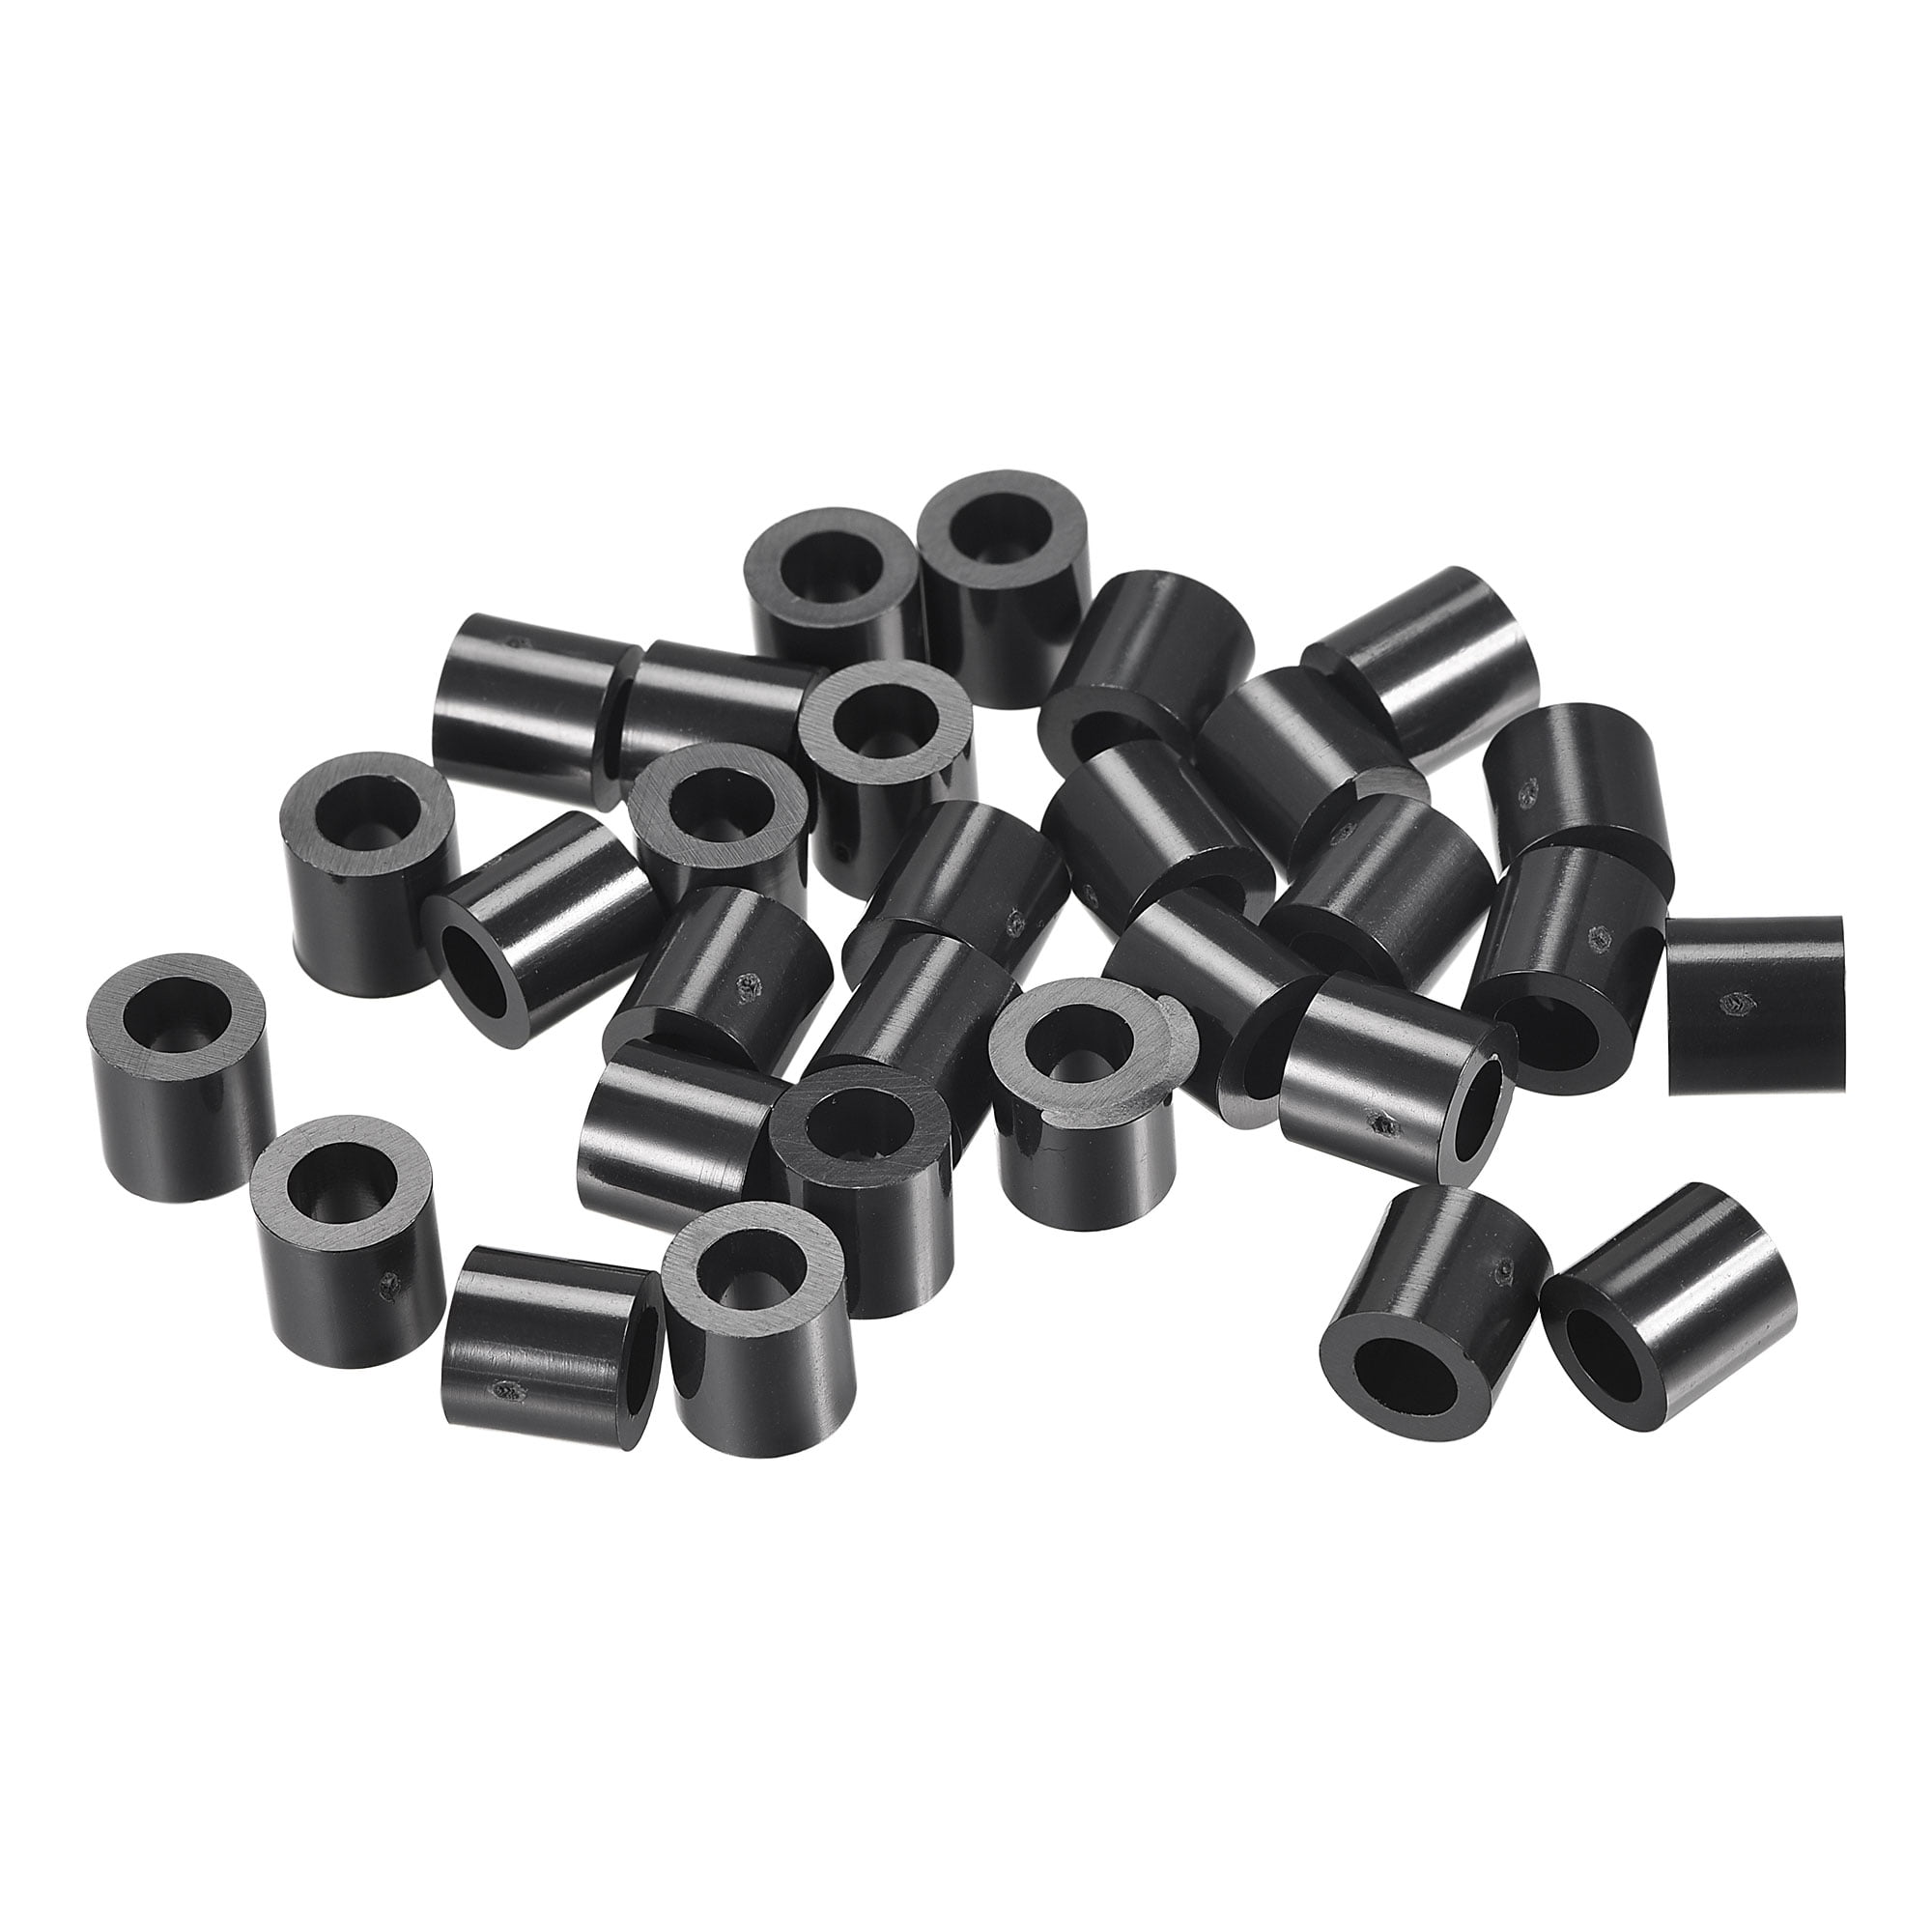 uxcell Nylon Round Spacer Washer 4.2mm ID 7mm OD 8mm Height for M4 Screws Black 100Pcs 